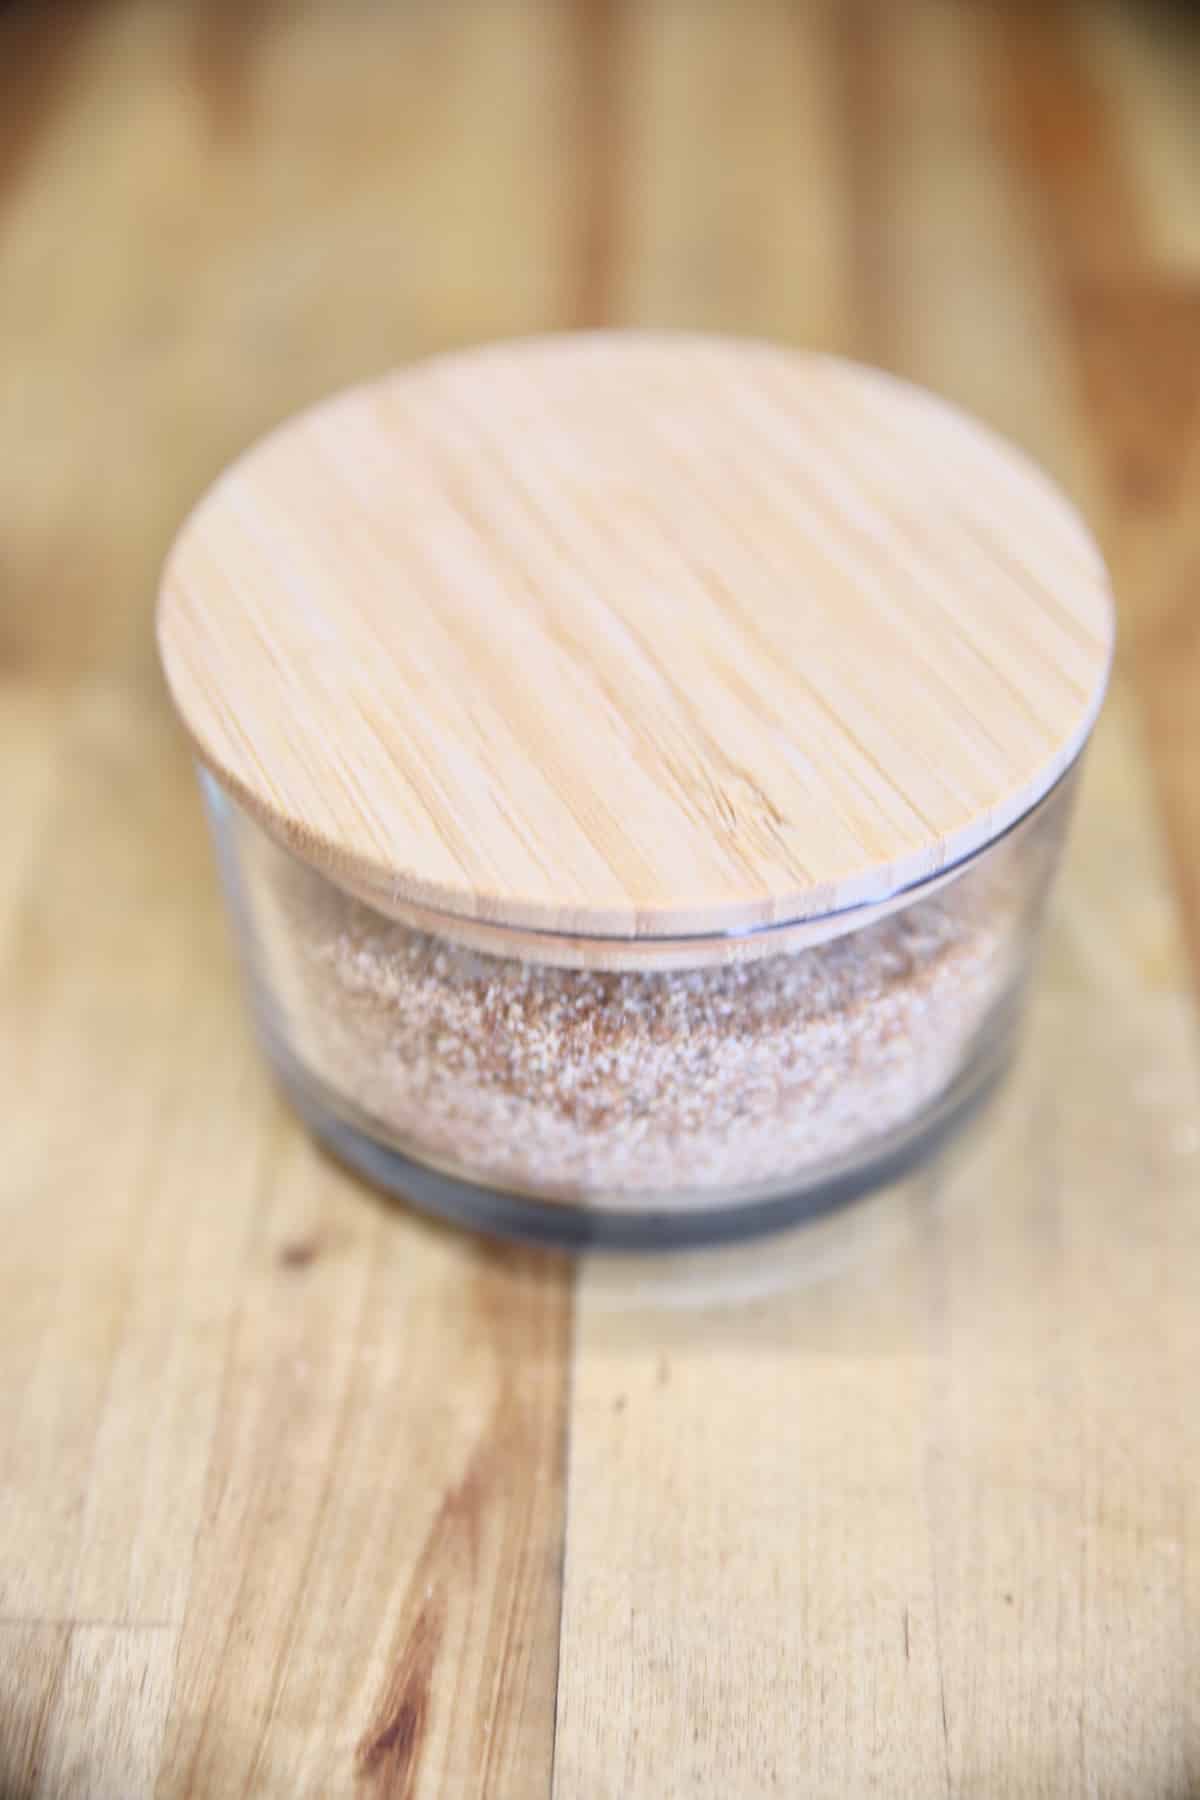 Chili seasoning in a bowl with wooden lid.